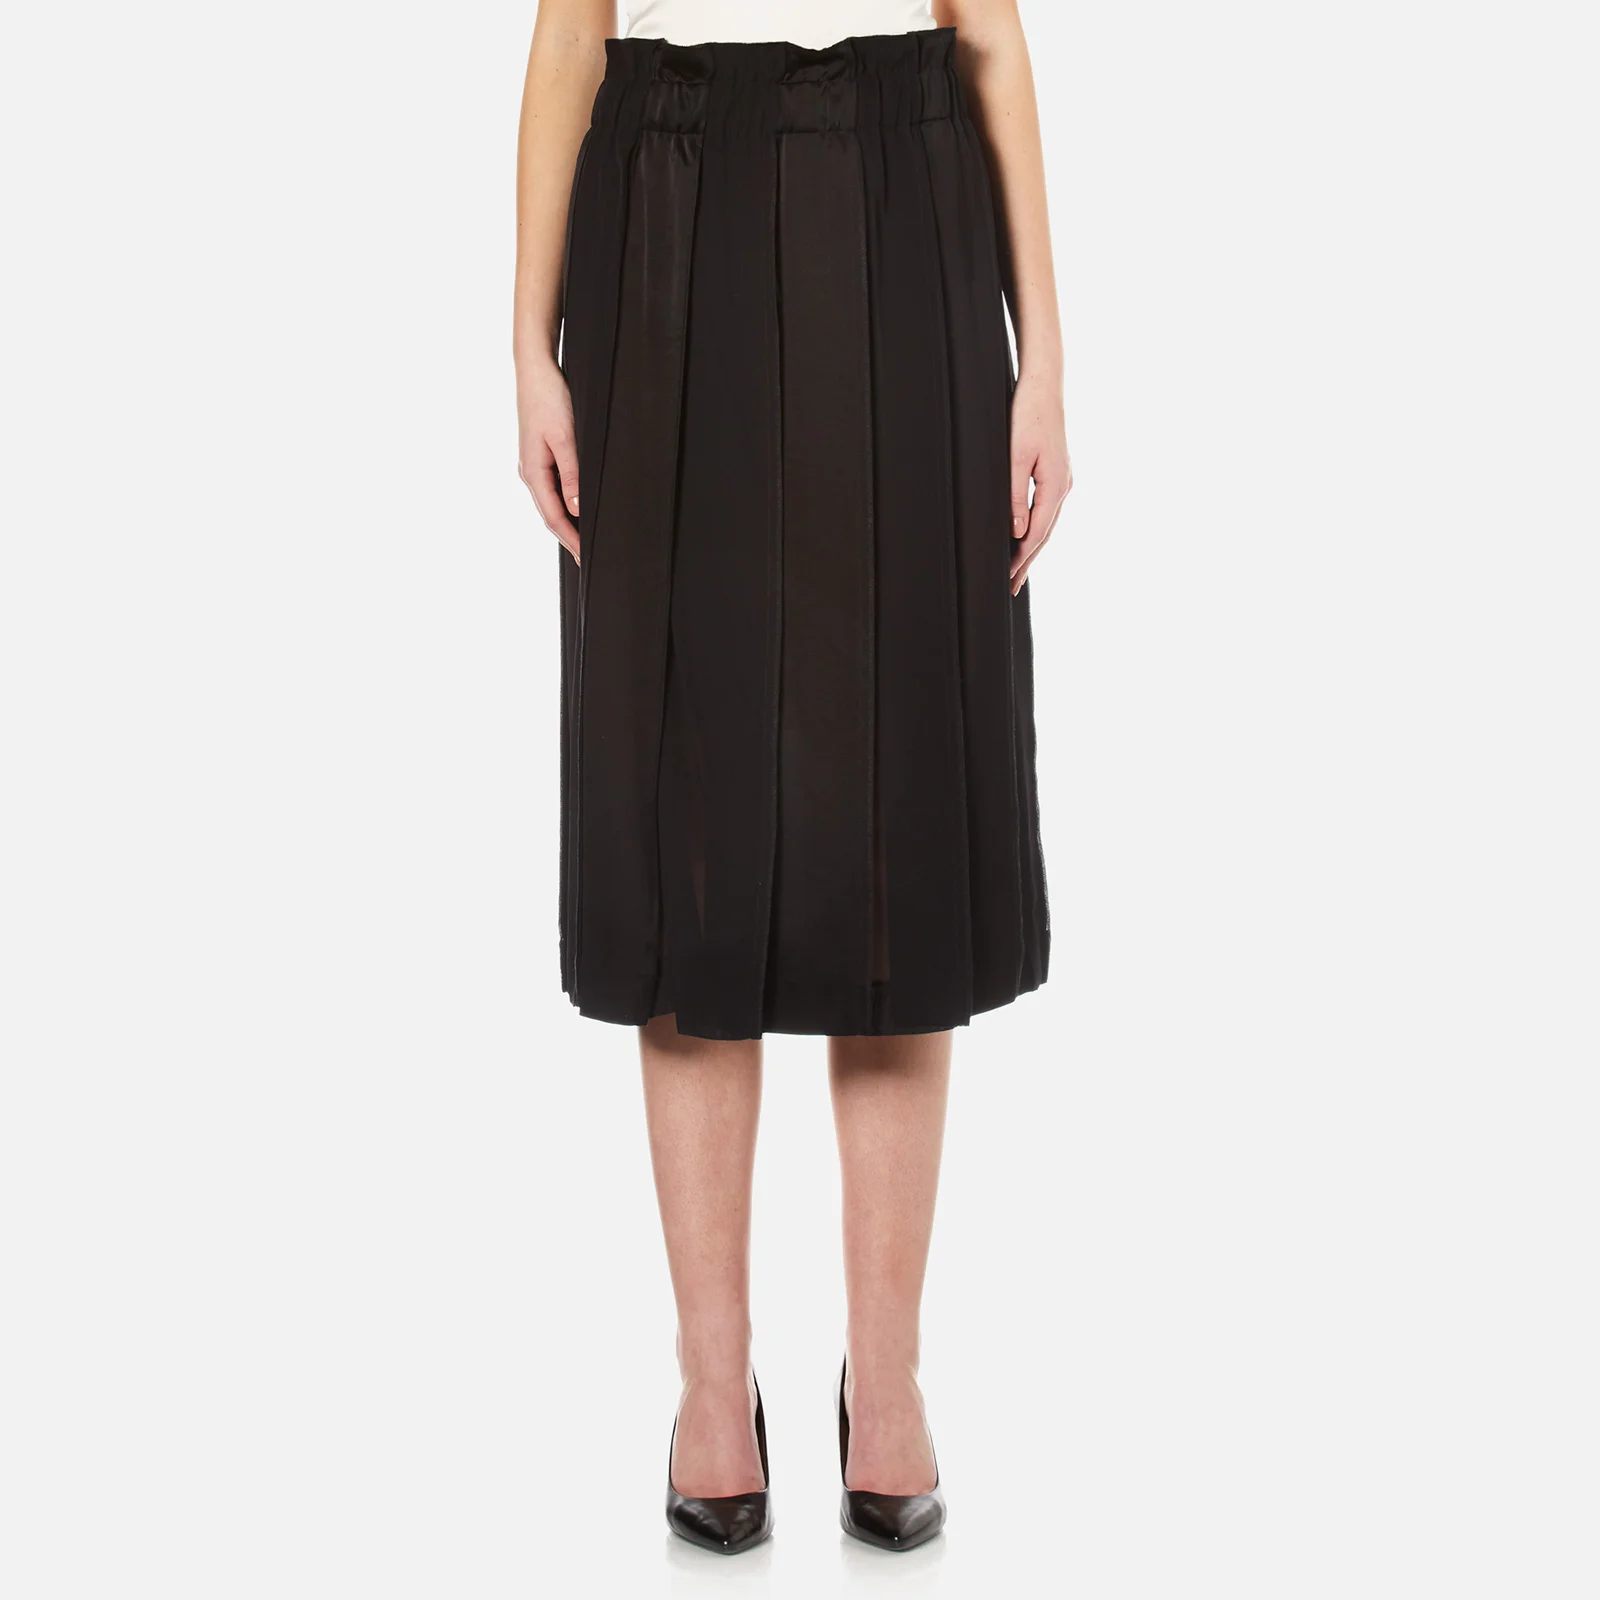 DKNY Women's Paneled Skirt with Hidden Drawcord - Black Image 1